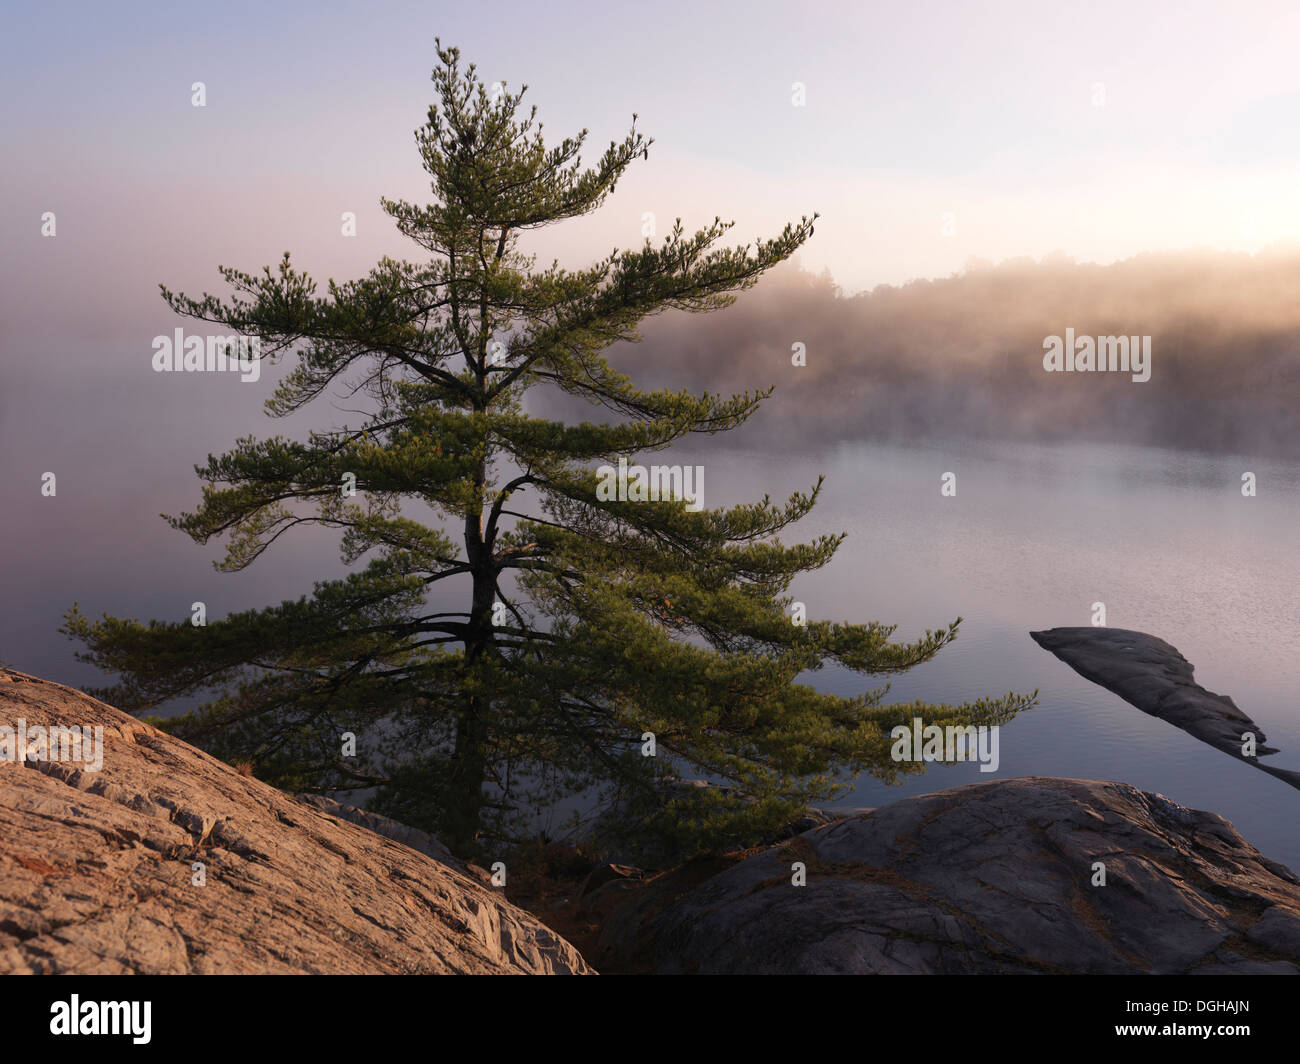 Sunrise nature scenery of a pine tree on a shore of mist covered lake George. Killarney Provincial Park, Ontario, Canada. Stock Photo